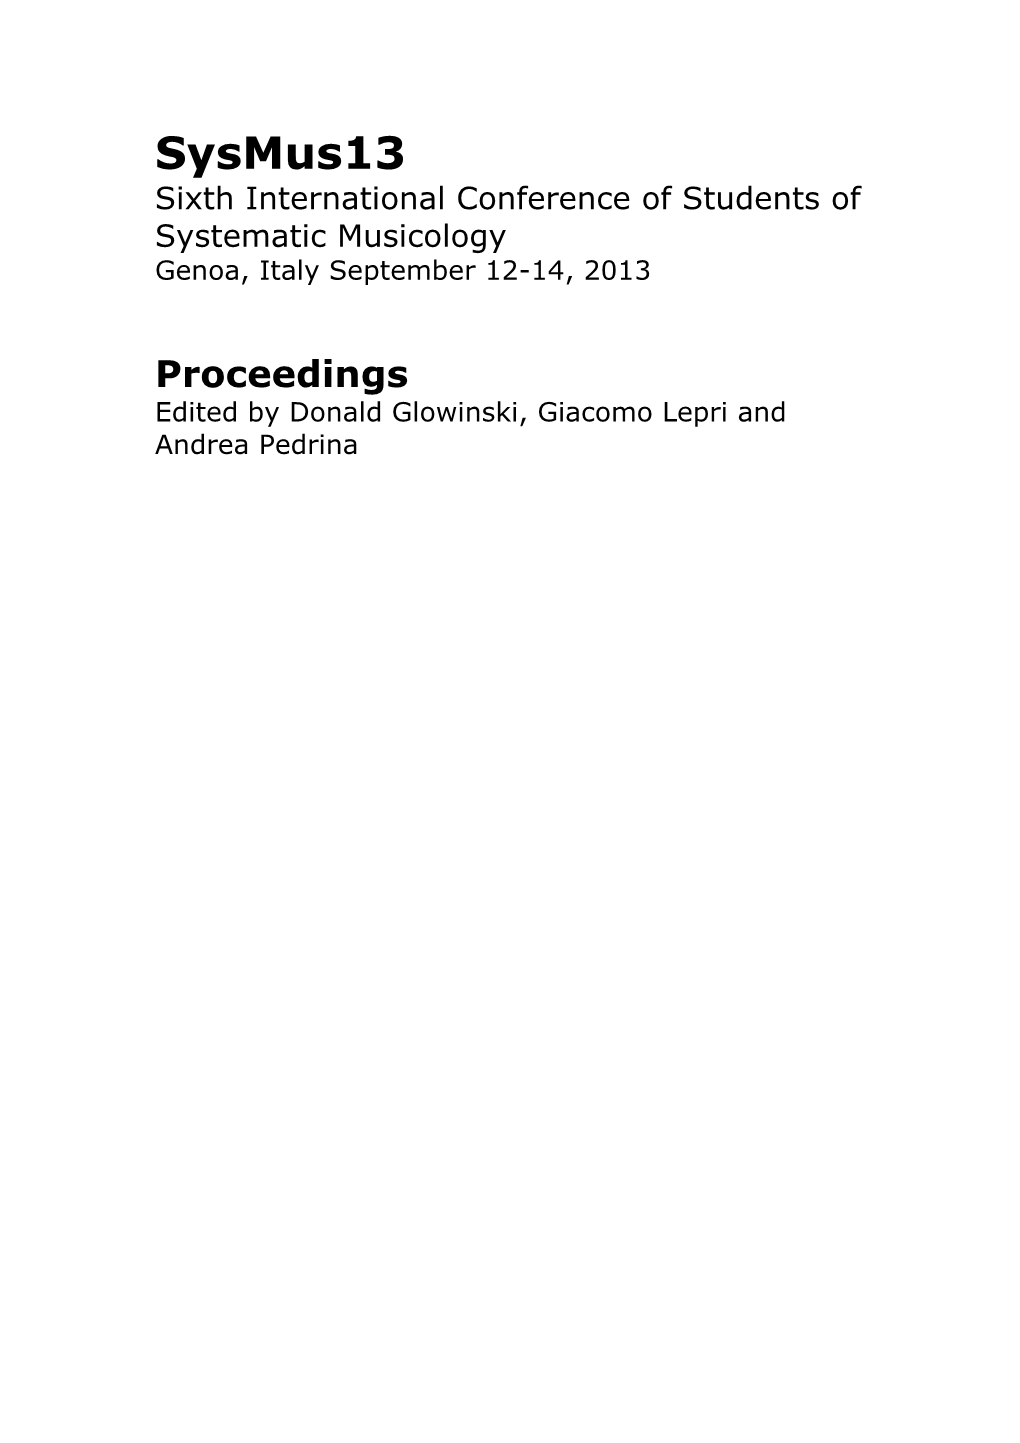 Sysmus13 Sixth International Conference of Students of Systematic Musicology Genoa, Italy September 12-14, 2013